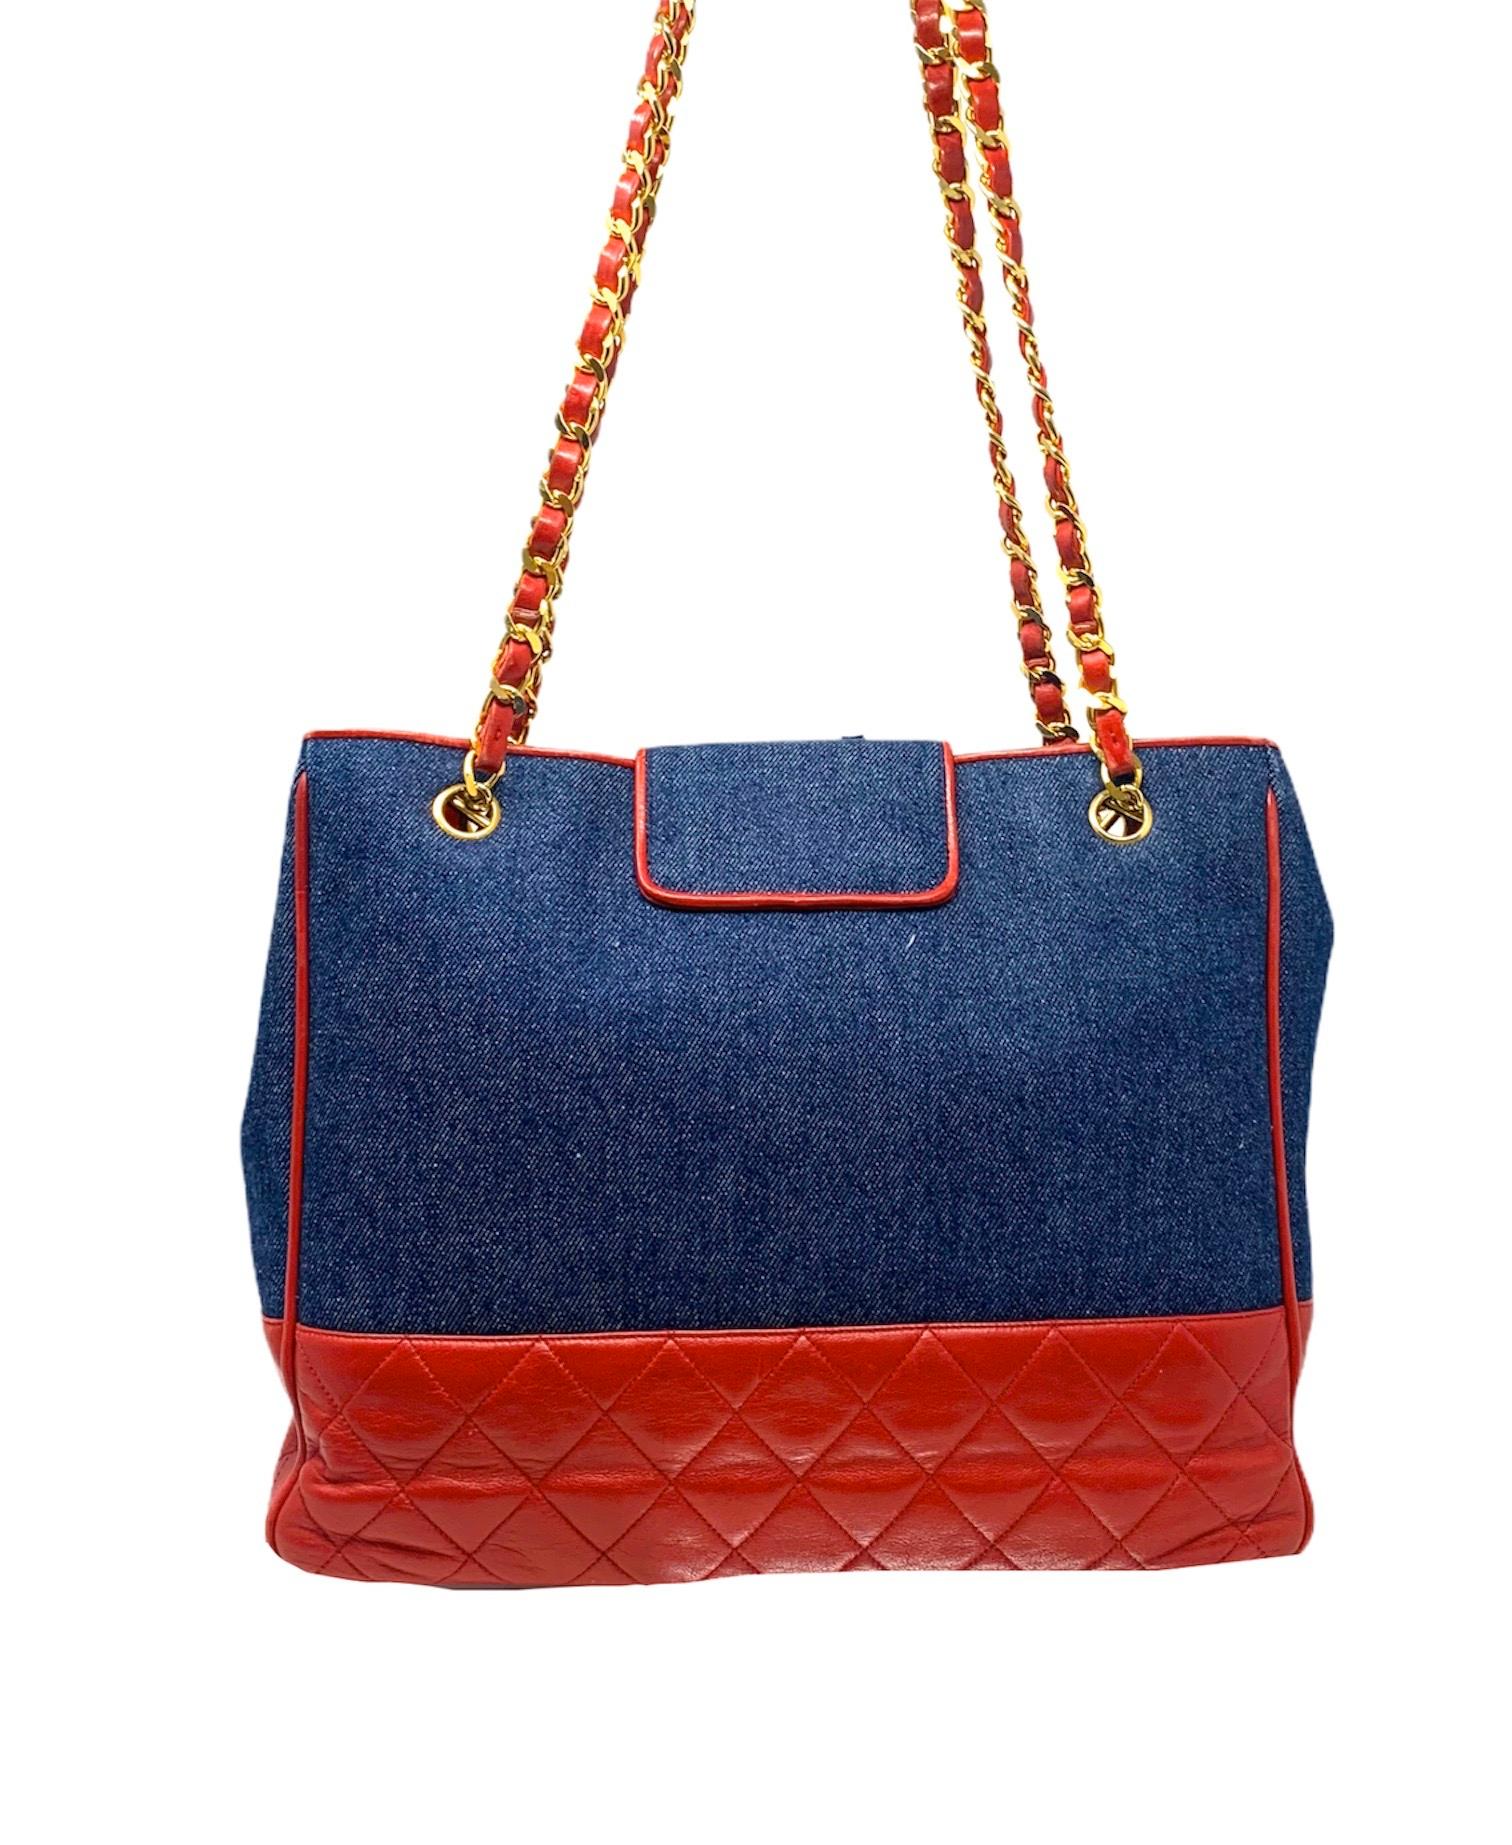 Chanel Vintage 90s Bag
in denim jeans fabric with smooth lambskin trim
red color is worn on the shoulder inside 2 pockets with zip
golden metal accessories with logo pendant
Dimensions 32 x 26 x 10 cm
In good overall condition, with slight signs of